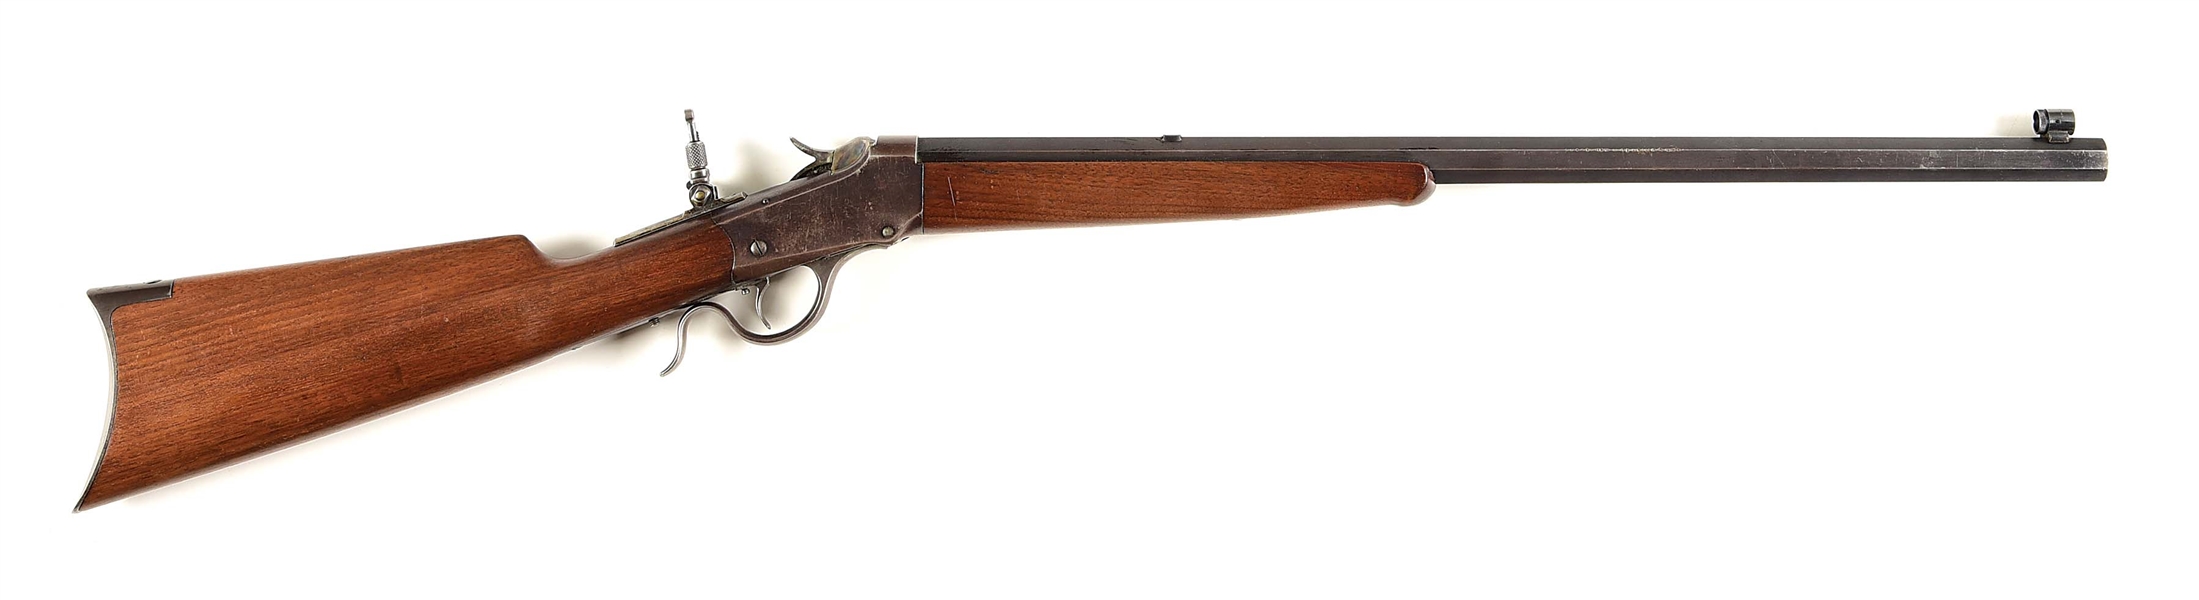 (C) WINCHESTER 1885 LOW WALL .22 LR SINGLE SHOT RIFLE.